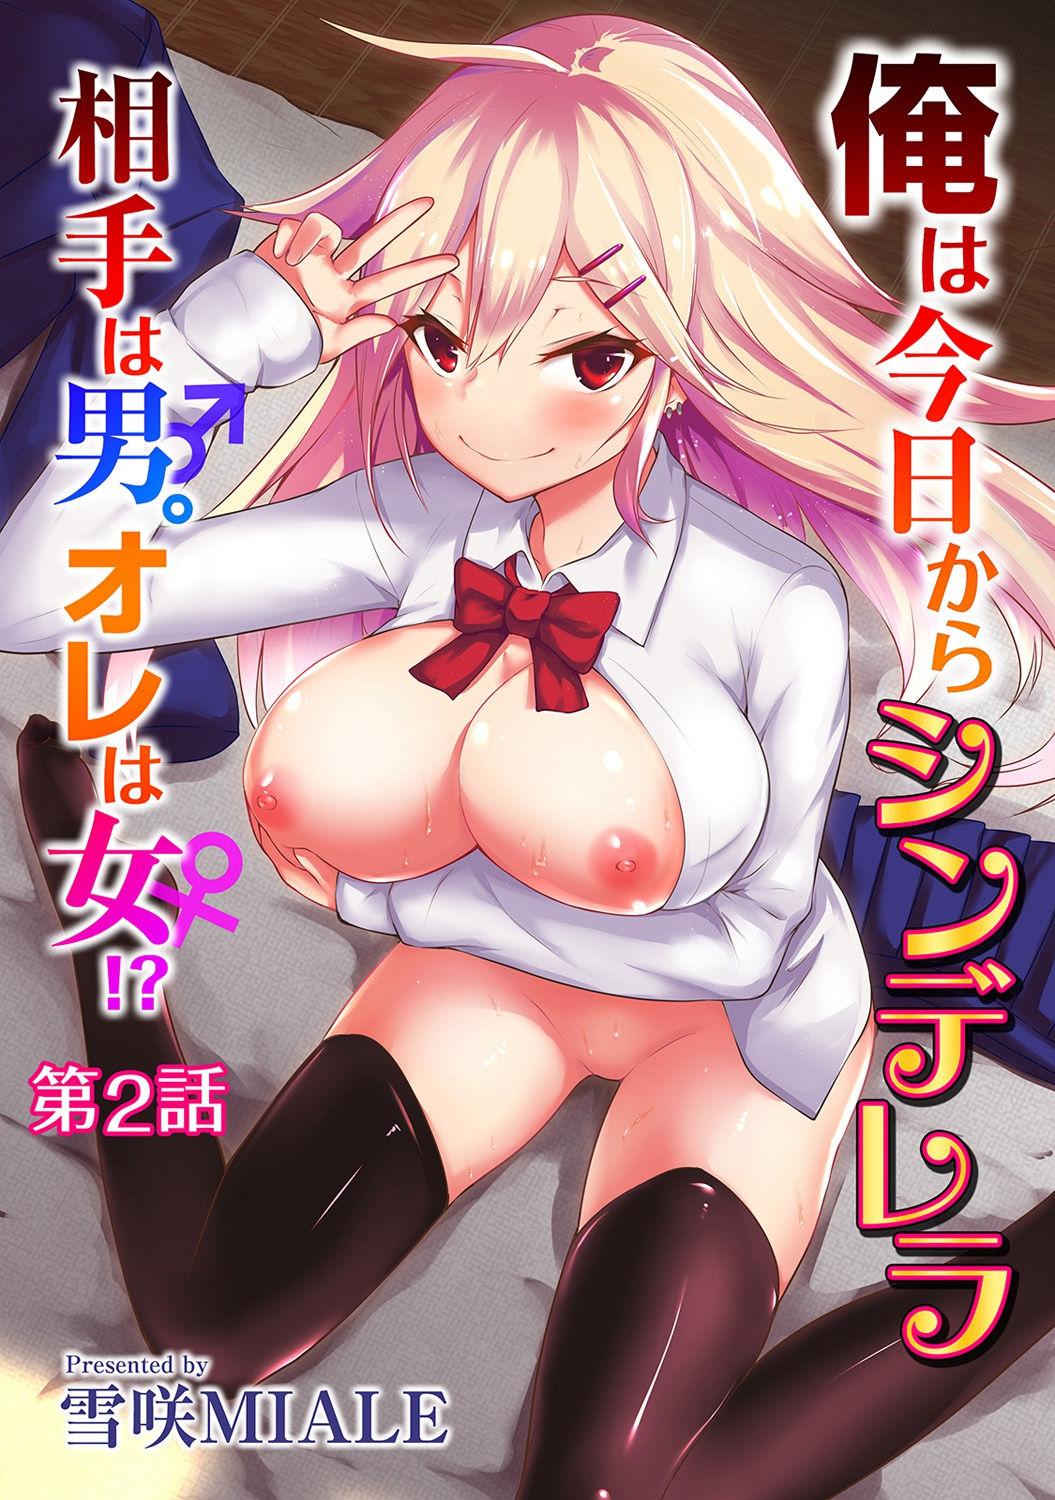 Sentones Ore wa Kyou kara Cinderella Aite wa Otoko. Ore wa Onna!? | From now on, I’m Cinderella. My Partner is a Man and I’m a Woman!? Ch. 2 Amateur - Picture 1